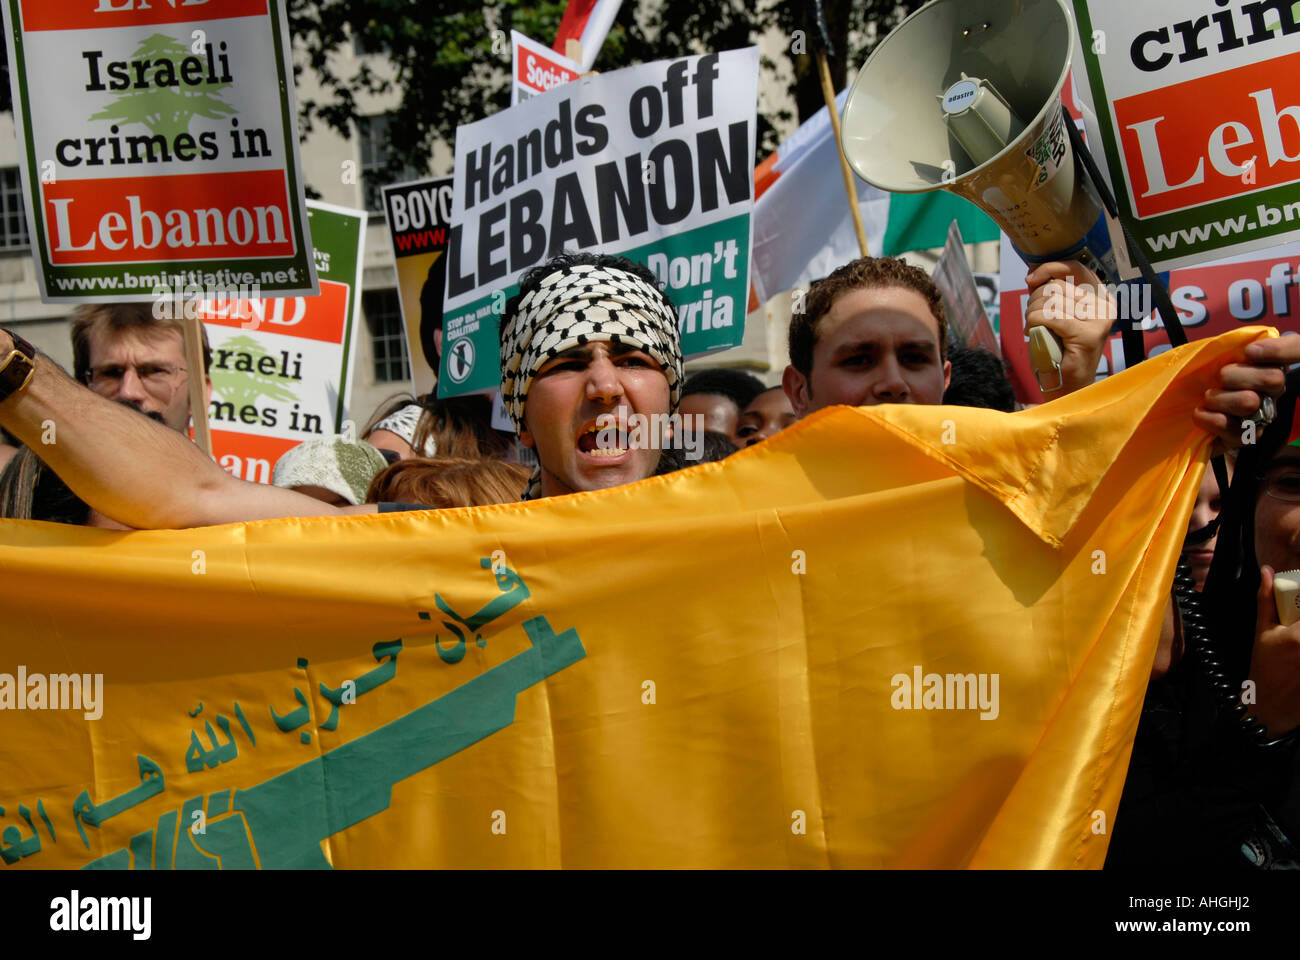 Demonstration outside Downing Street London of about 100,000 people protesting Israeli attack on Lebanon on August 5 2006. Stock Photo